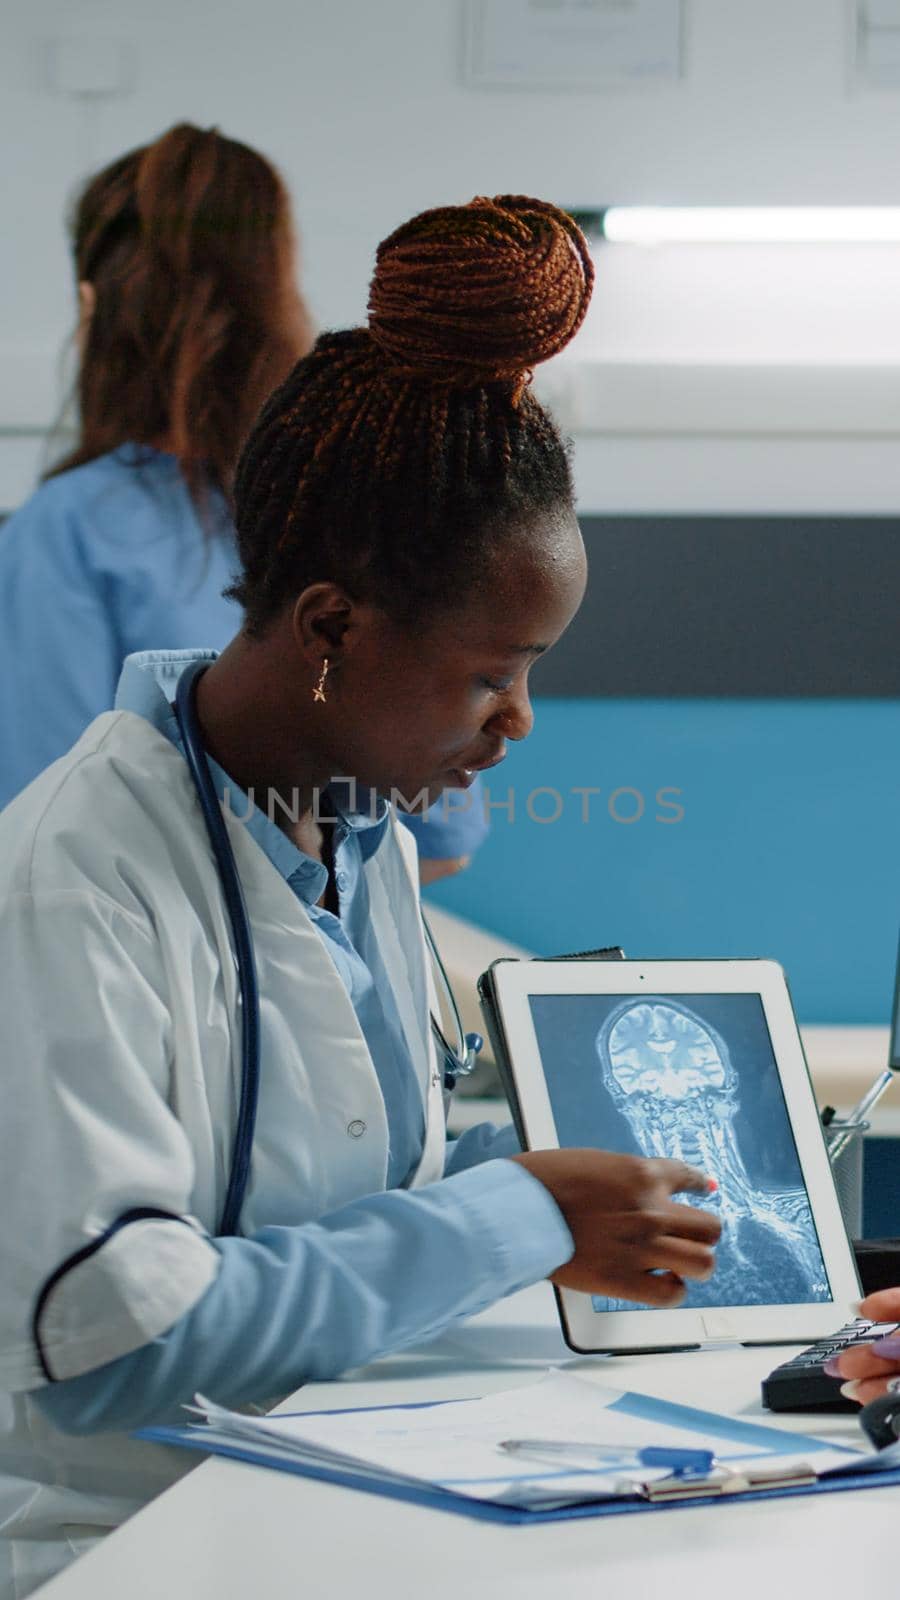 Medic holding x ray scan on tablet for consultation with patient in cabinet. Doctor and ill person looking at gadget screen with radiography for healthcare examination and checkup visit.